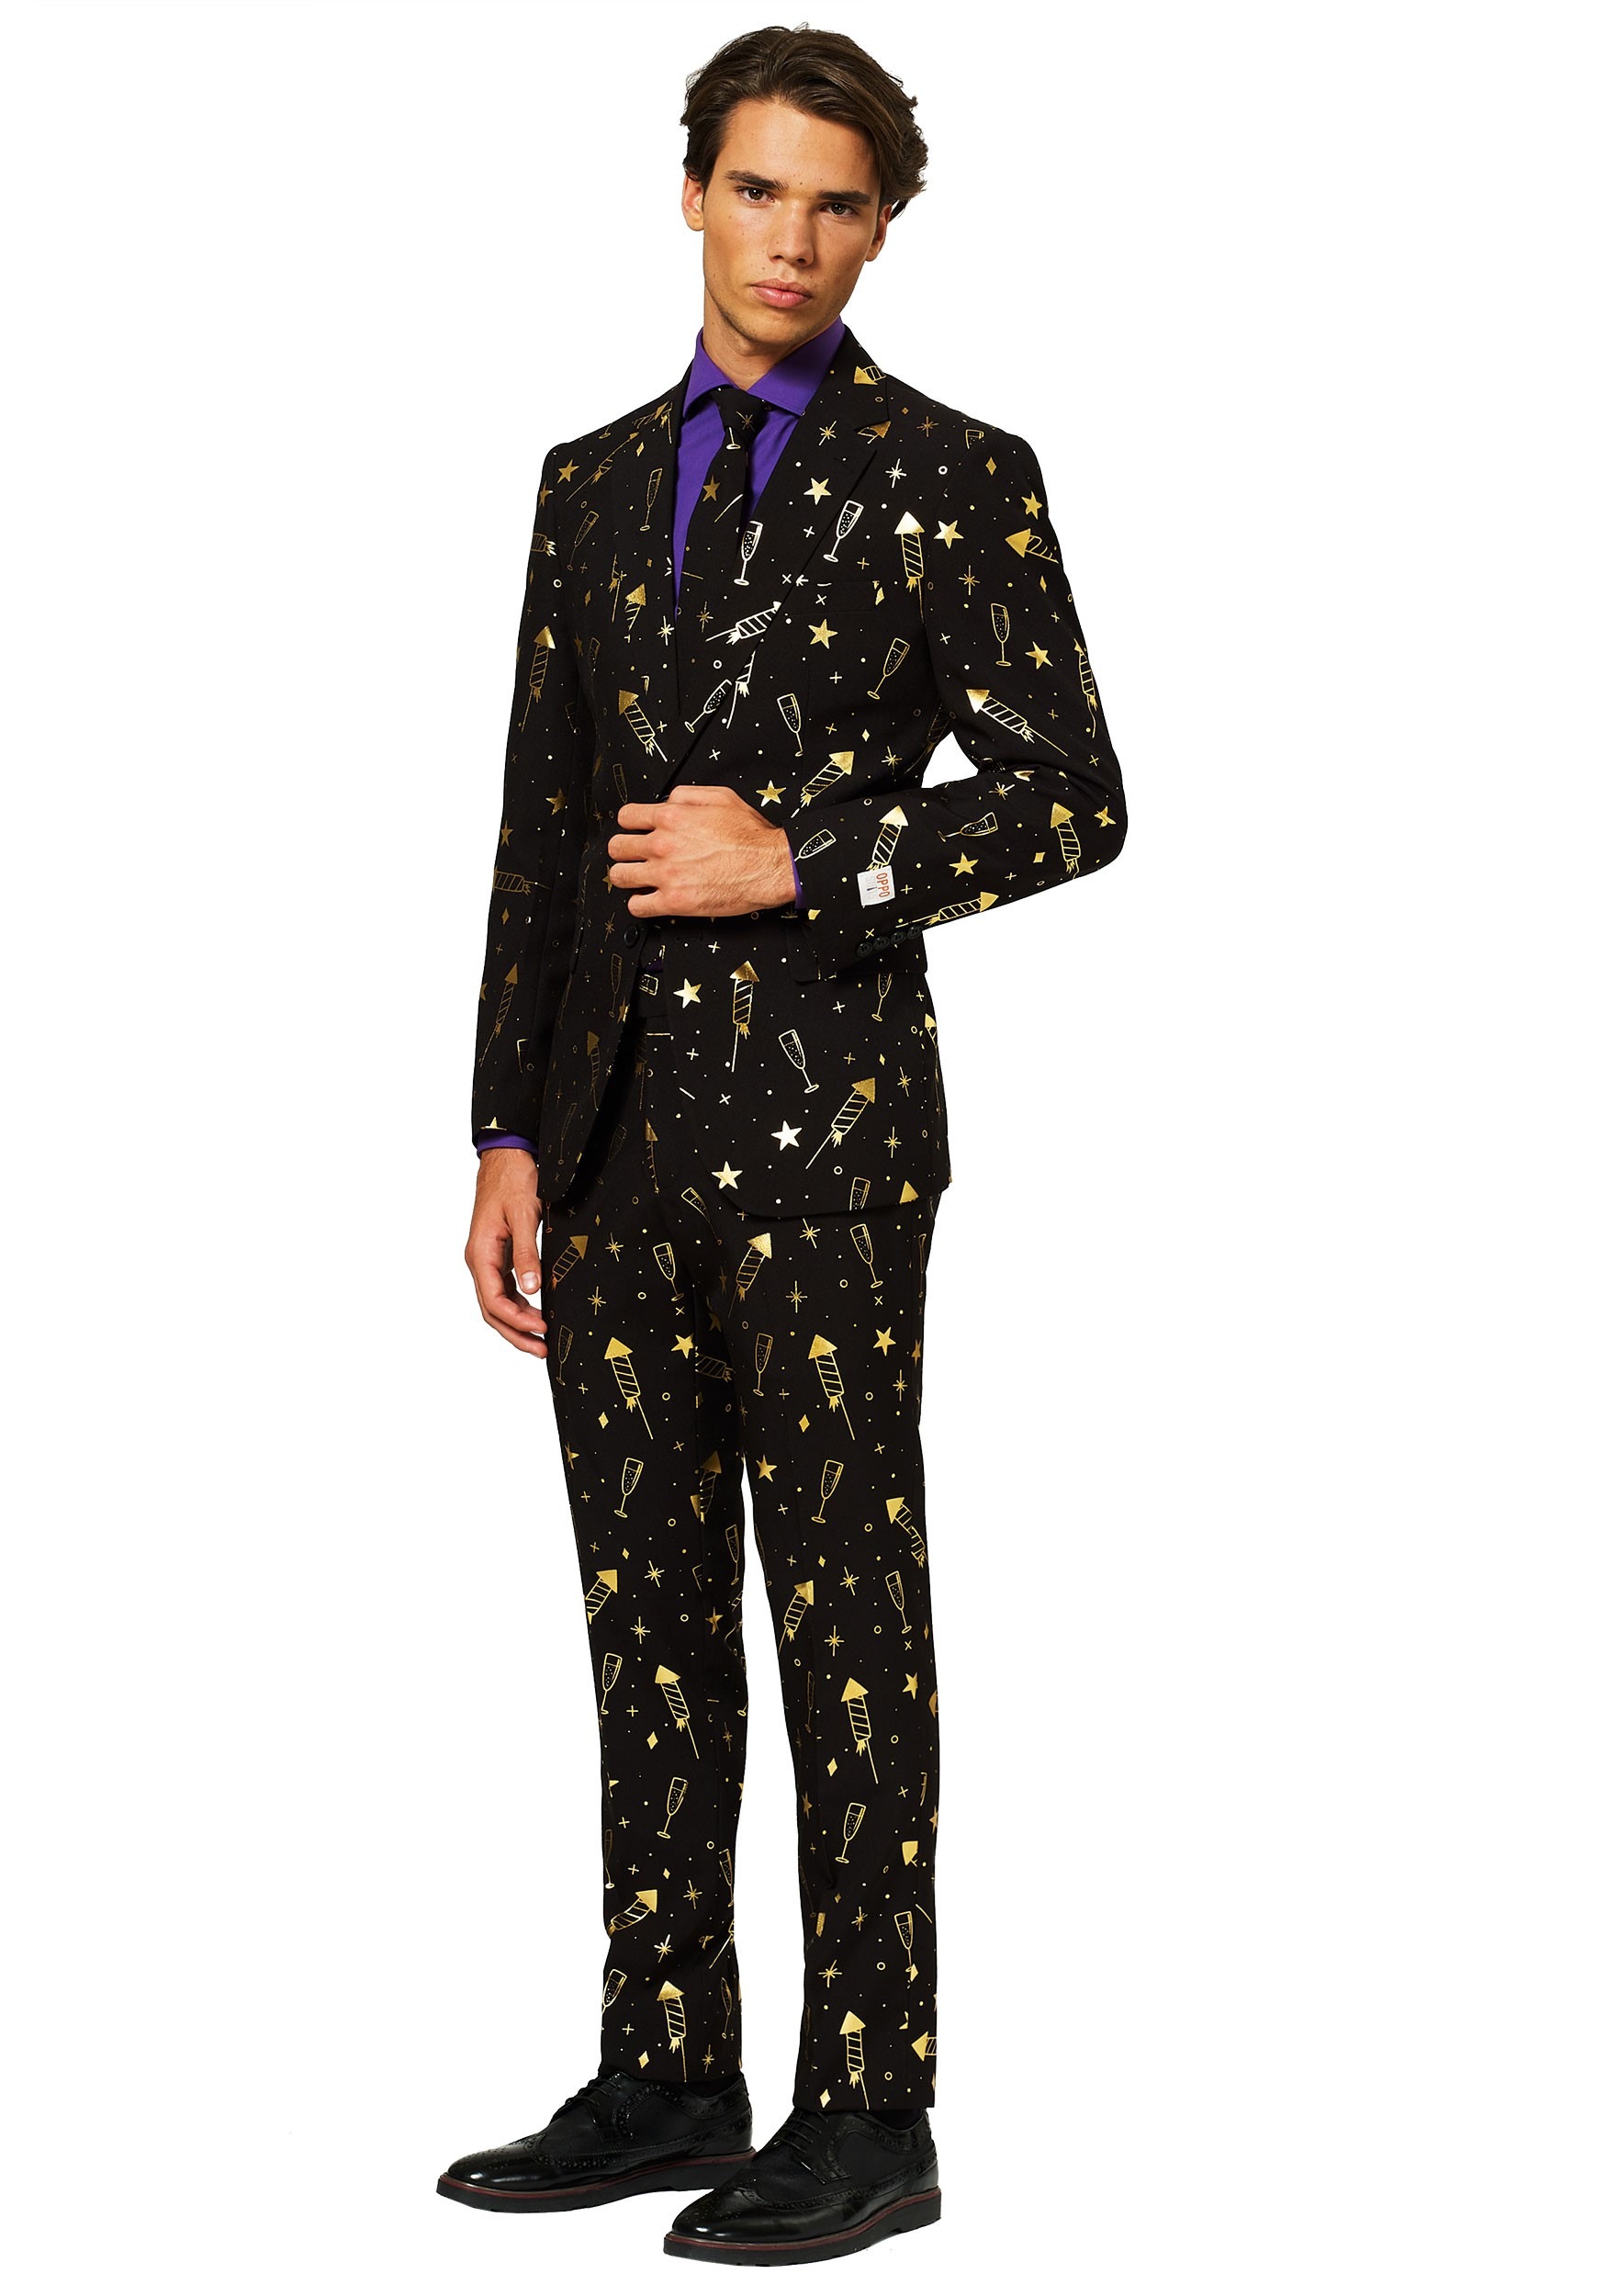 https://images.halloweencostumes.ca/products/60028/1-1/opposuit-fancy-fireworks-mens-suit.jpg